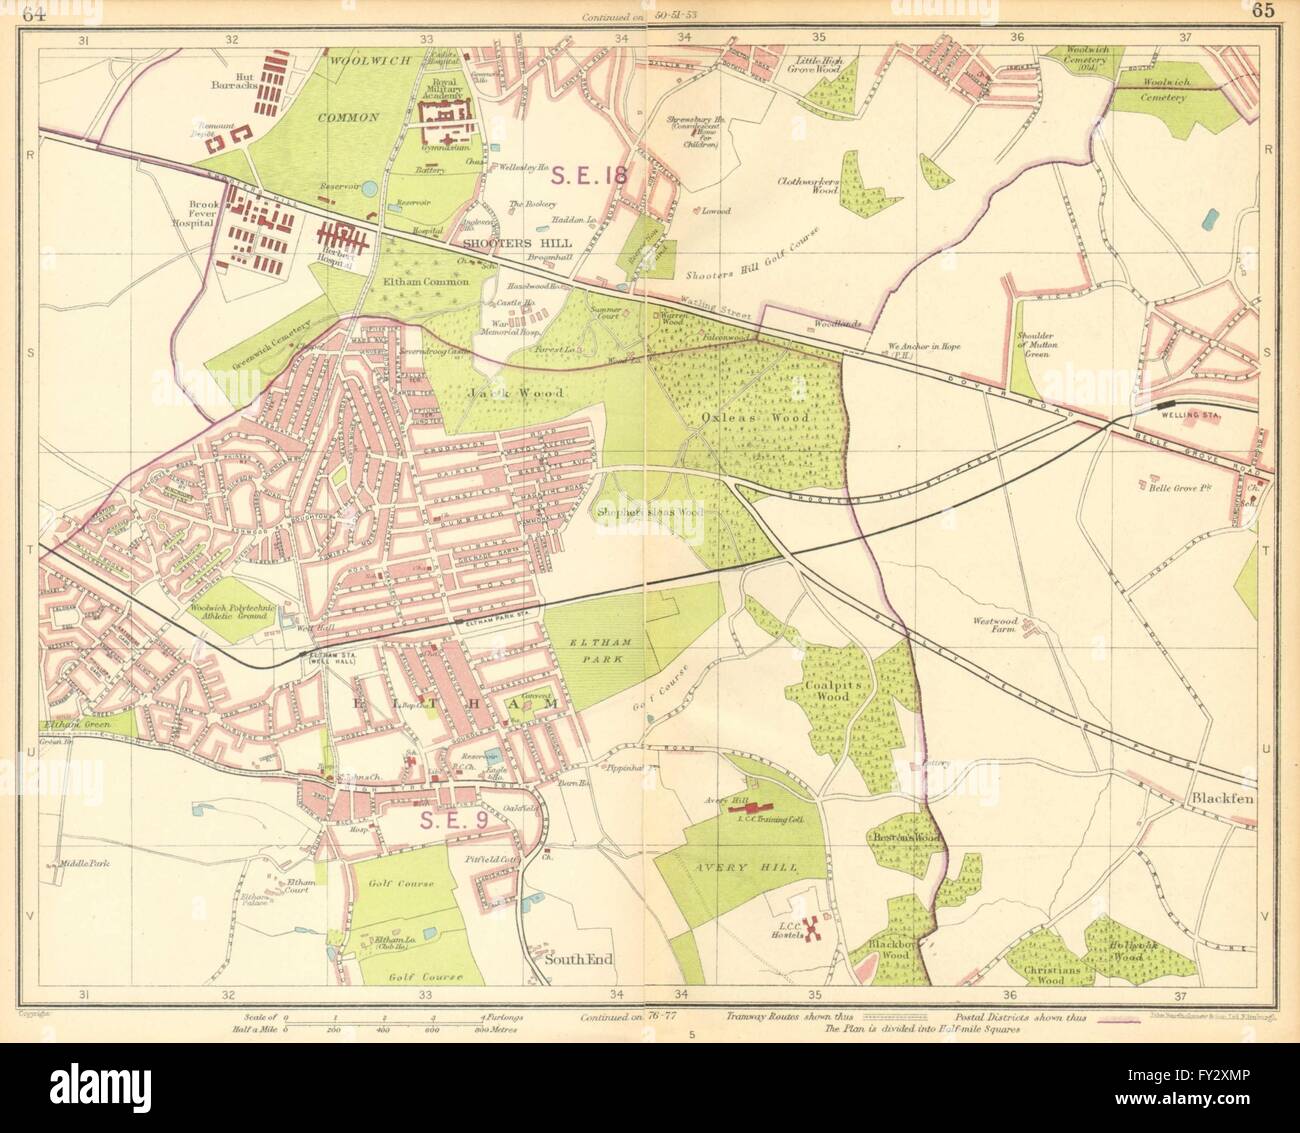 Londres SE : Beauraing Shooters Hill South End Welling Blackfen Avery Hill, 1930 map Banque D'Images